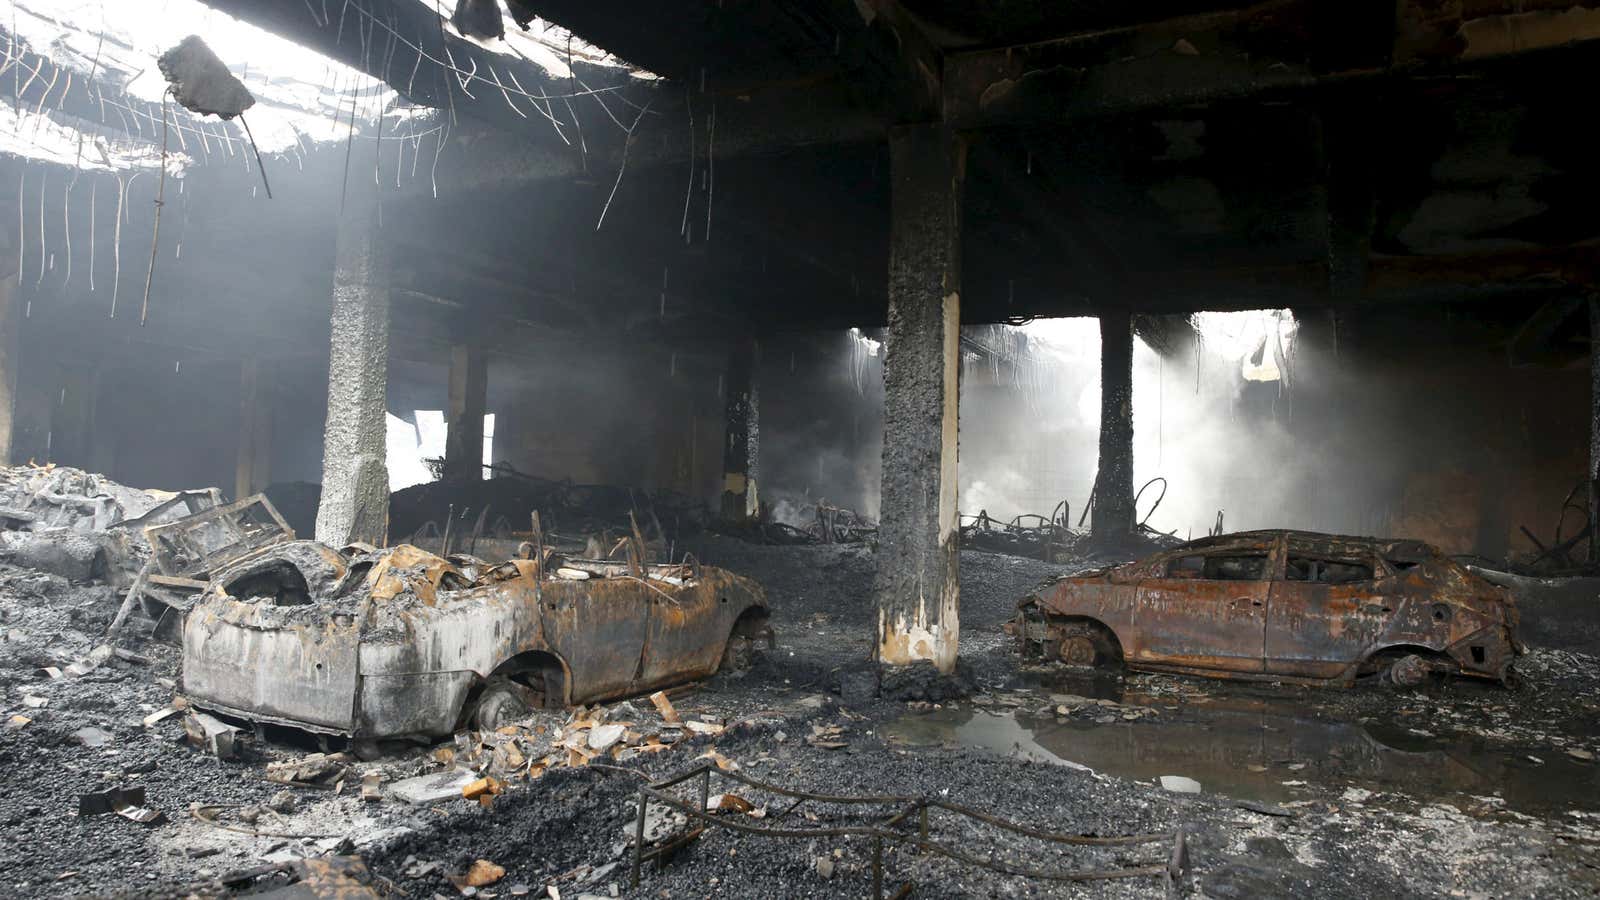 The interior of the factory after last week’s fire.